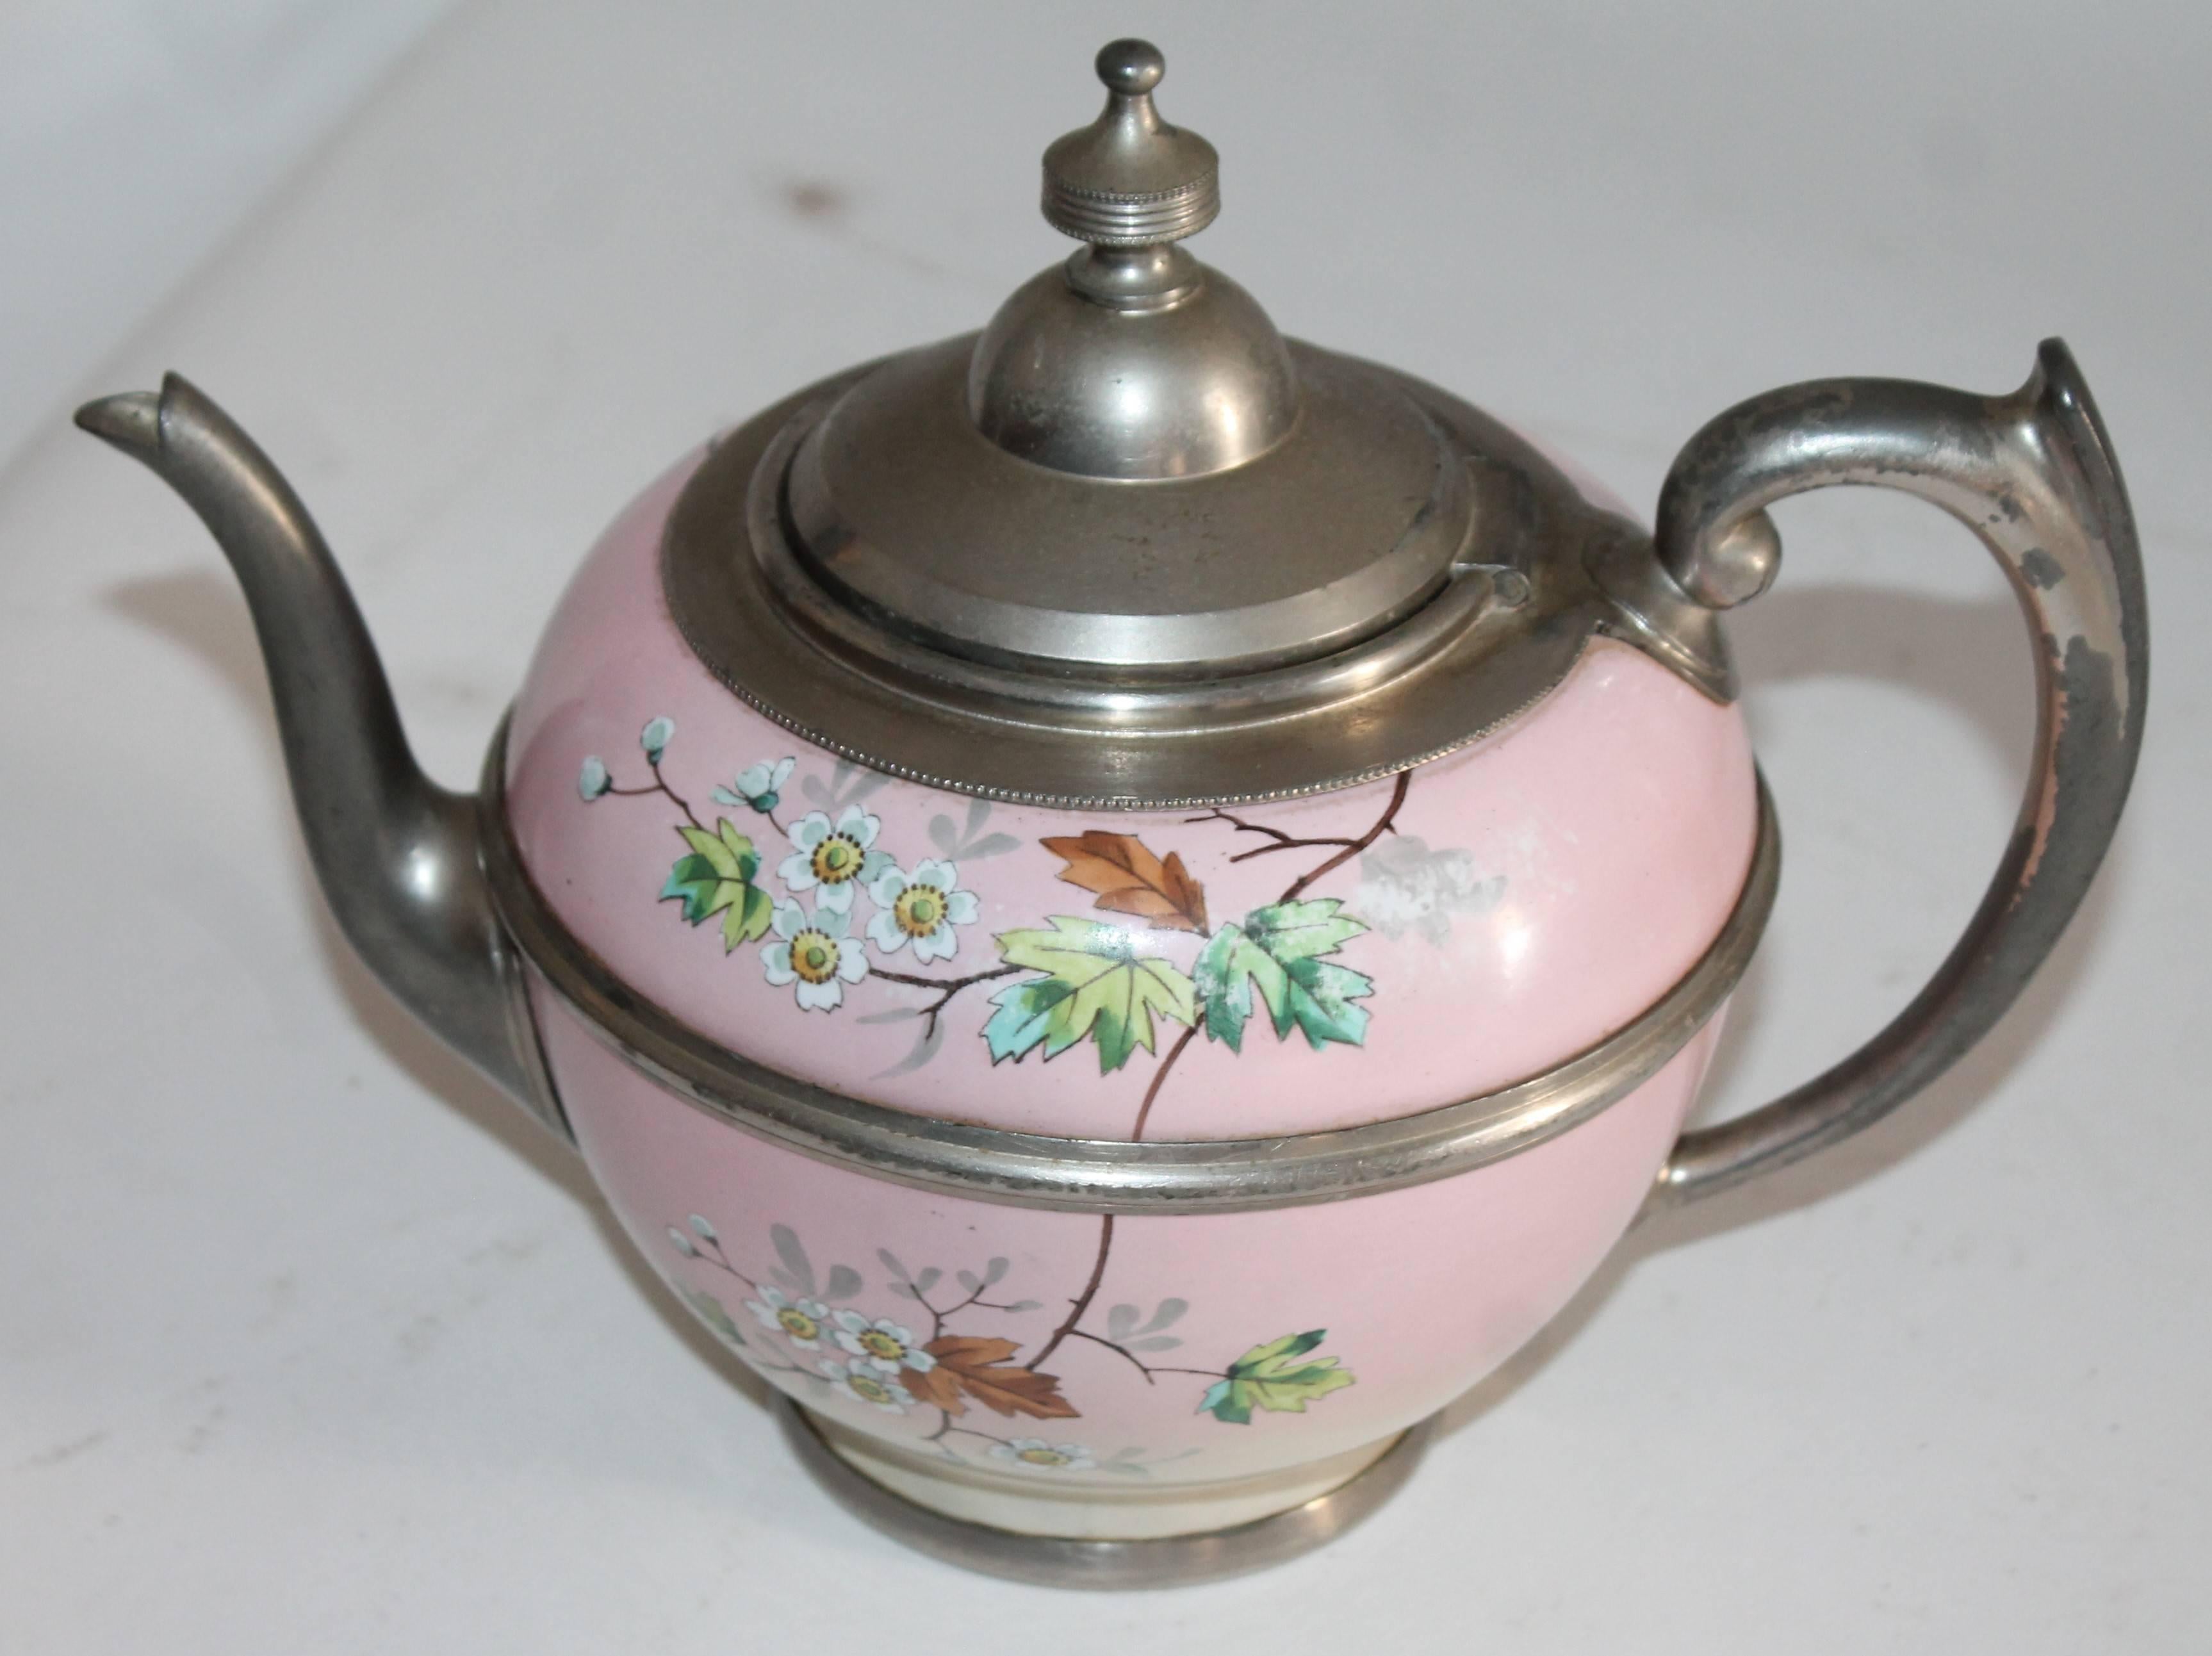 This early and quite beautiful hand-painted enamelware coffee pot is trimmed in pewter and in pristine condition. It was in a private collection and we believe it to be English.